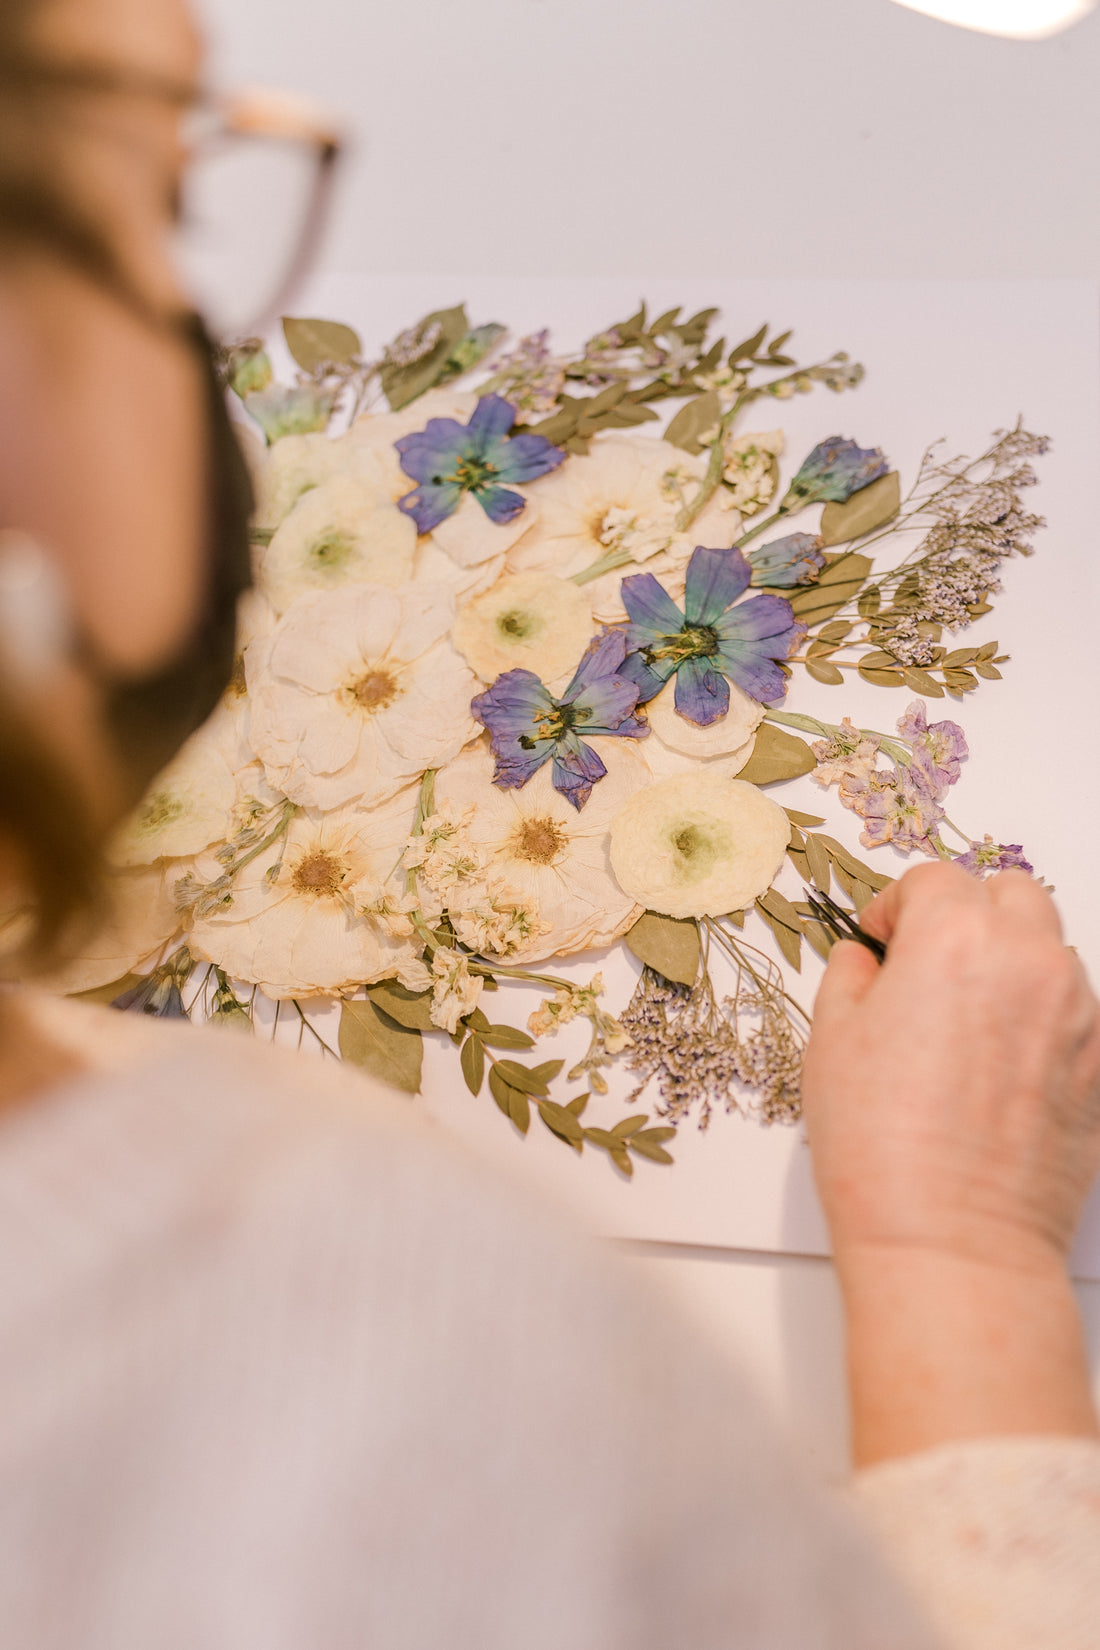 Pressed Bouquet Shop's designer making a perfect pressed bouquet floral design for a 16x20" frame